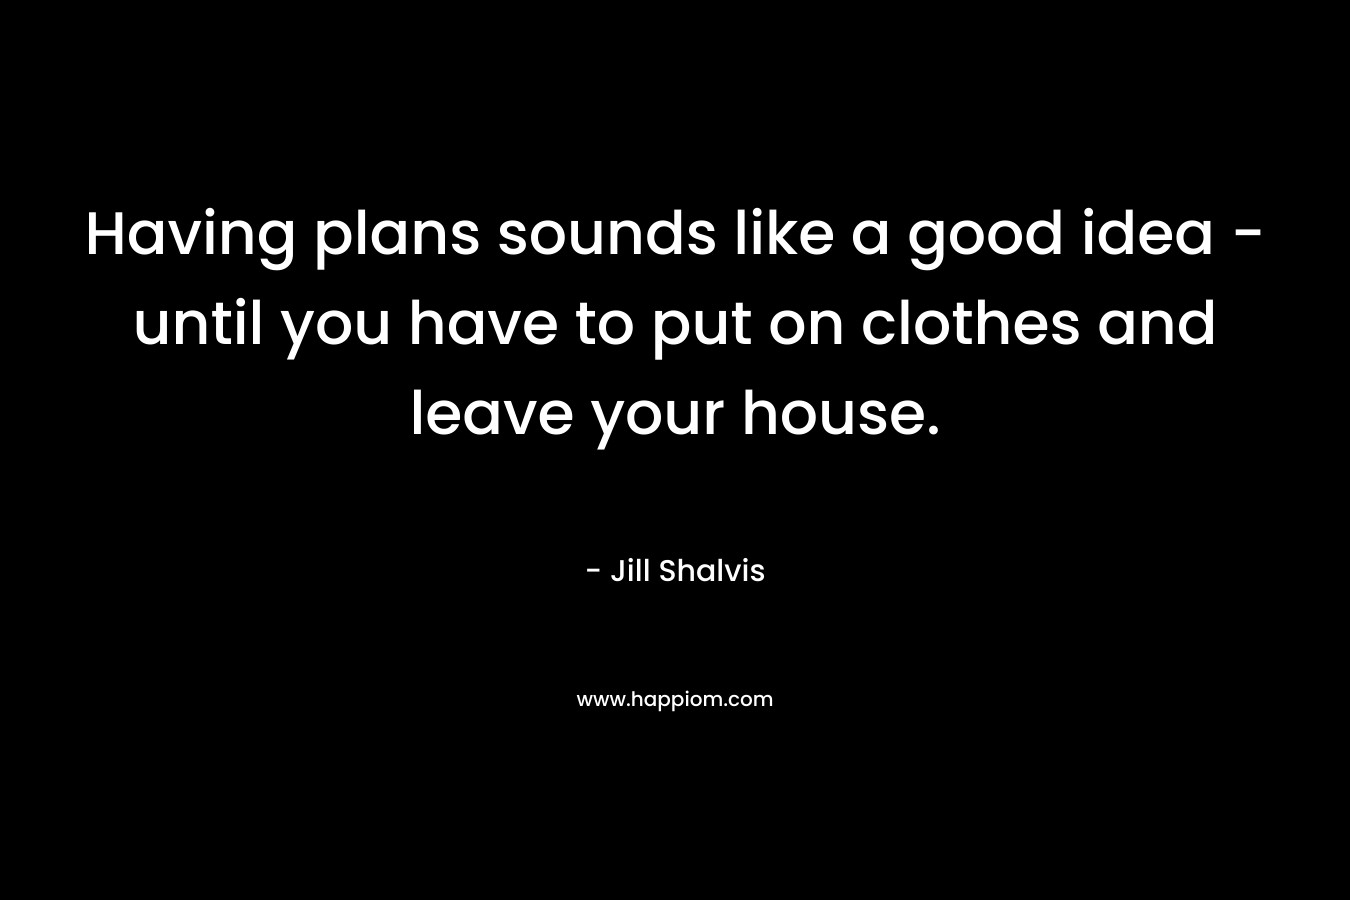 Having plans sounds like a good idea – until you have to put on clothes and leave your house. – Jill Shalvis